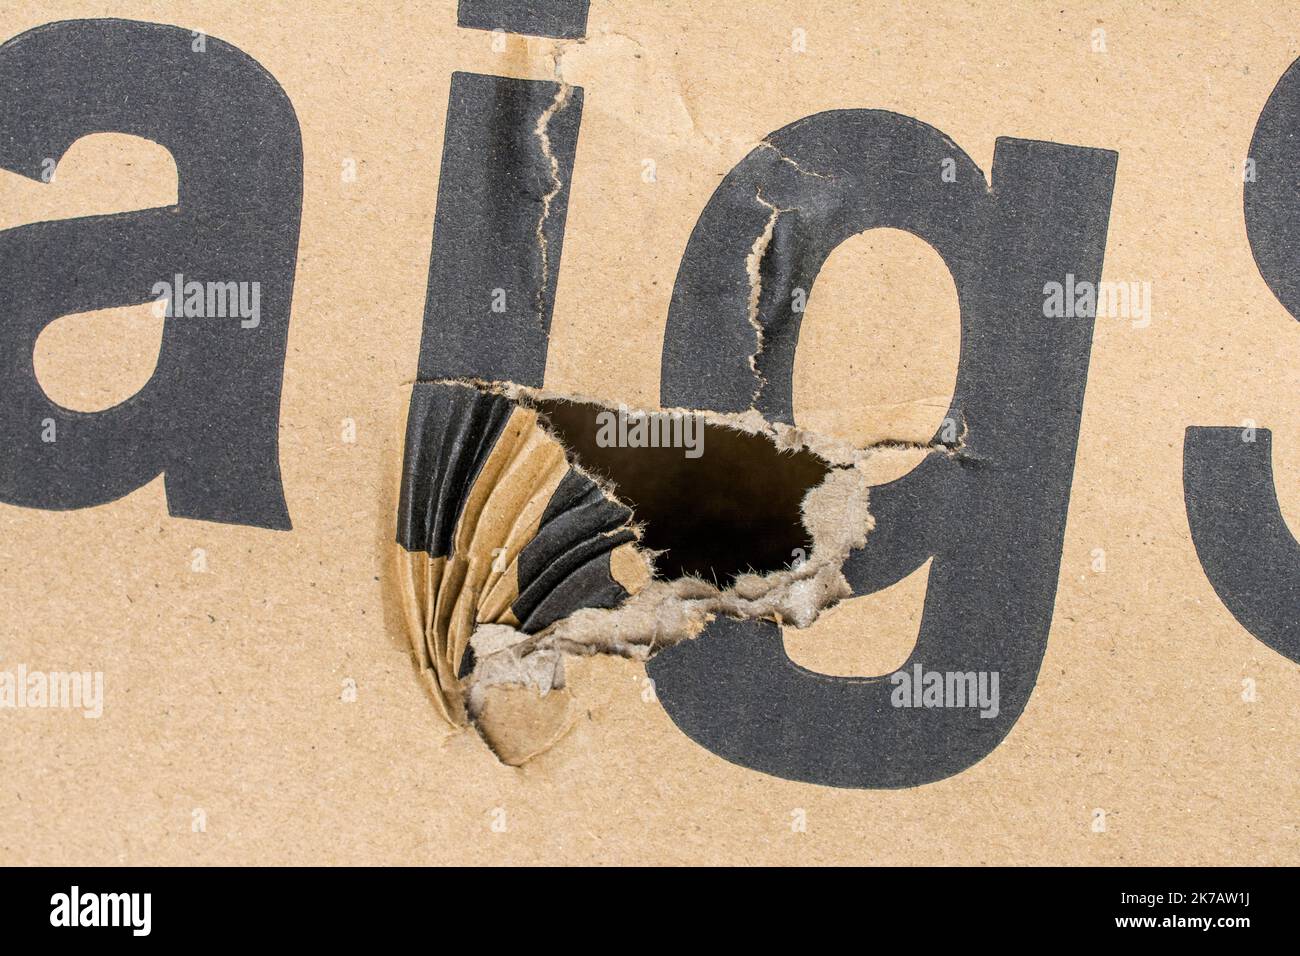 Visible signs of damage to a cardboard shipping box damaged in transit. Possibly for insurance claims, damage insurance, careless handling. Stock Photo